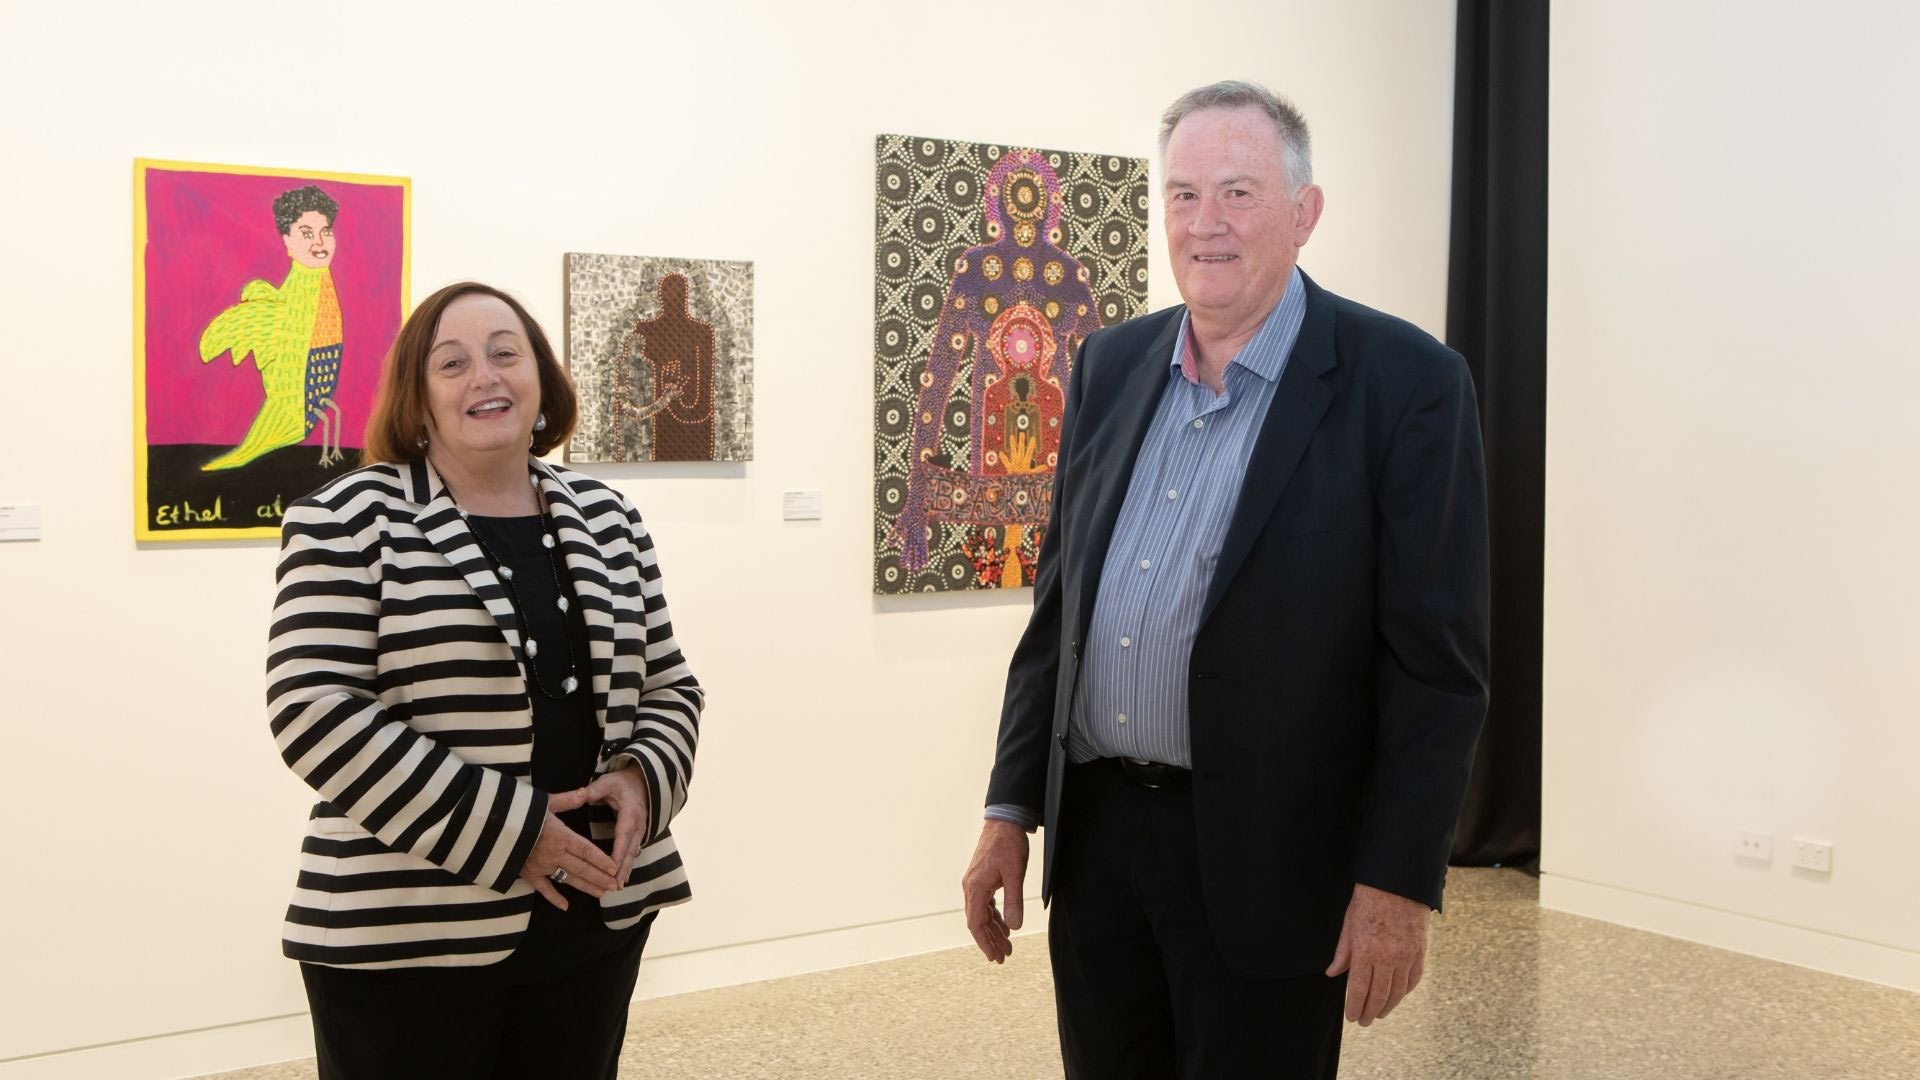 UOW Vice-Chancellor Professor Patricia M. Davidson and art collector Mr. John F. Morrissey at The Morrissey Donations exhibition at UOW Gallery